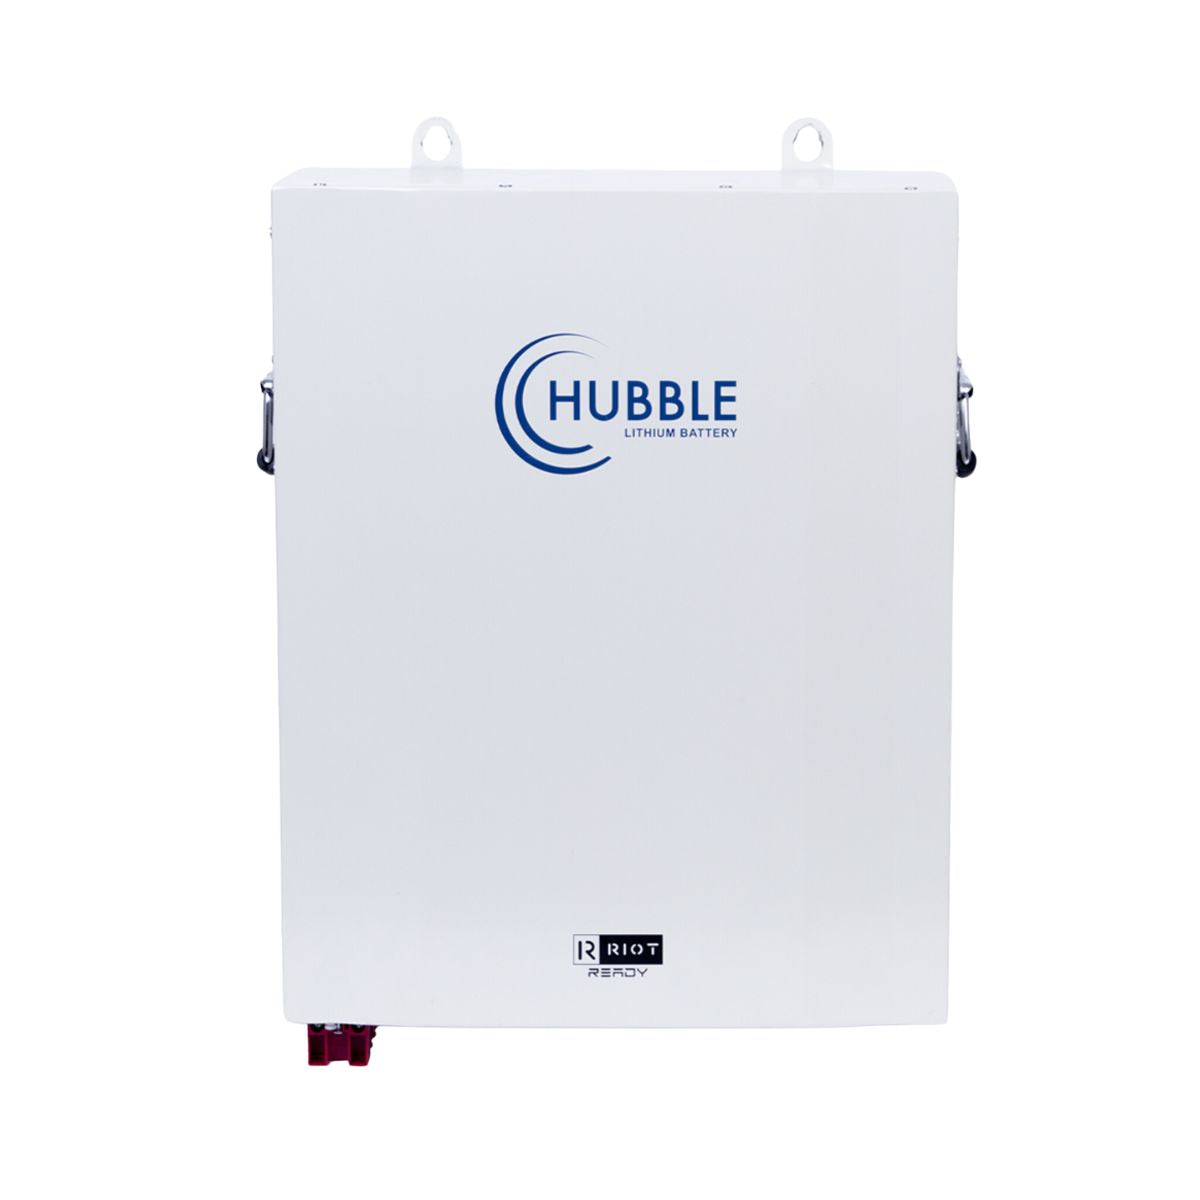 Hubble AM-2 110Ah 51V 5.5kWh Lithium Battery